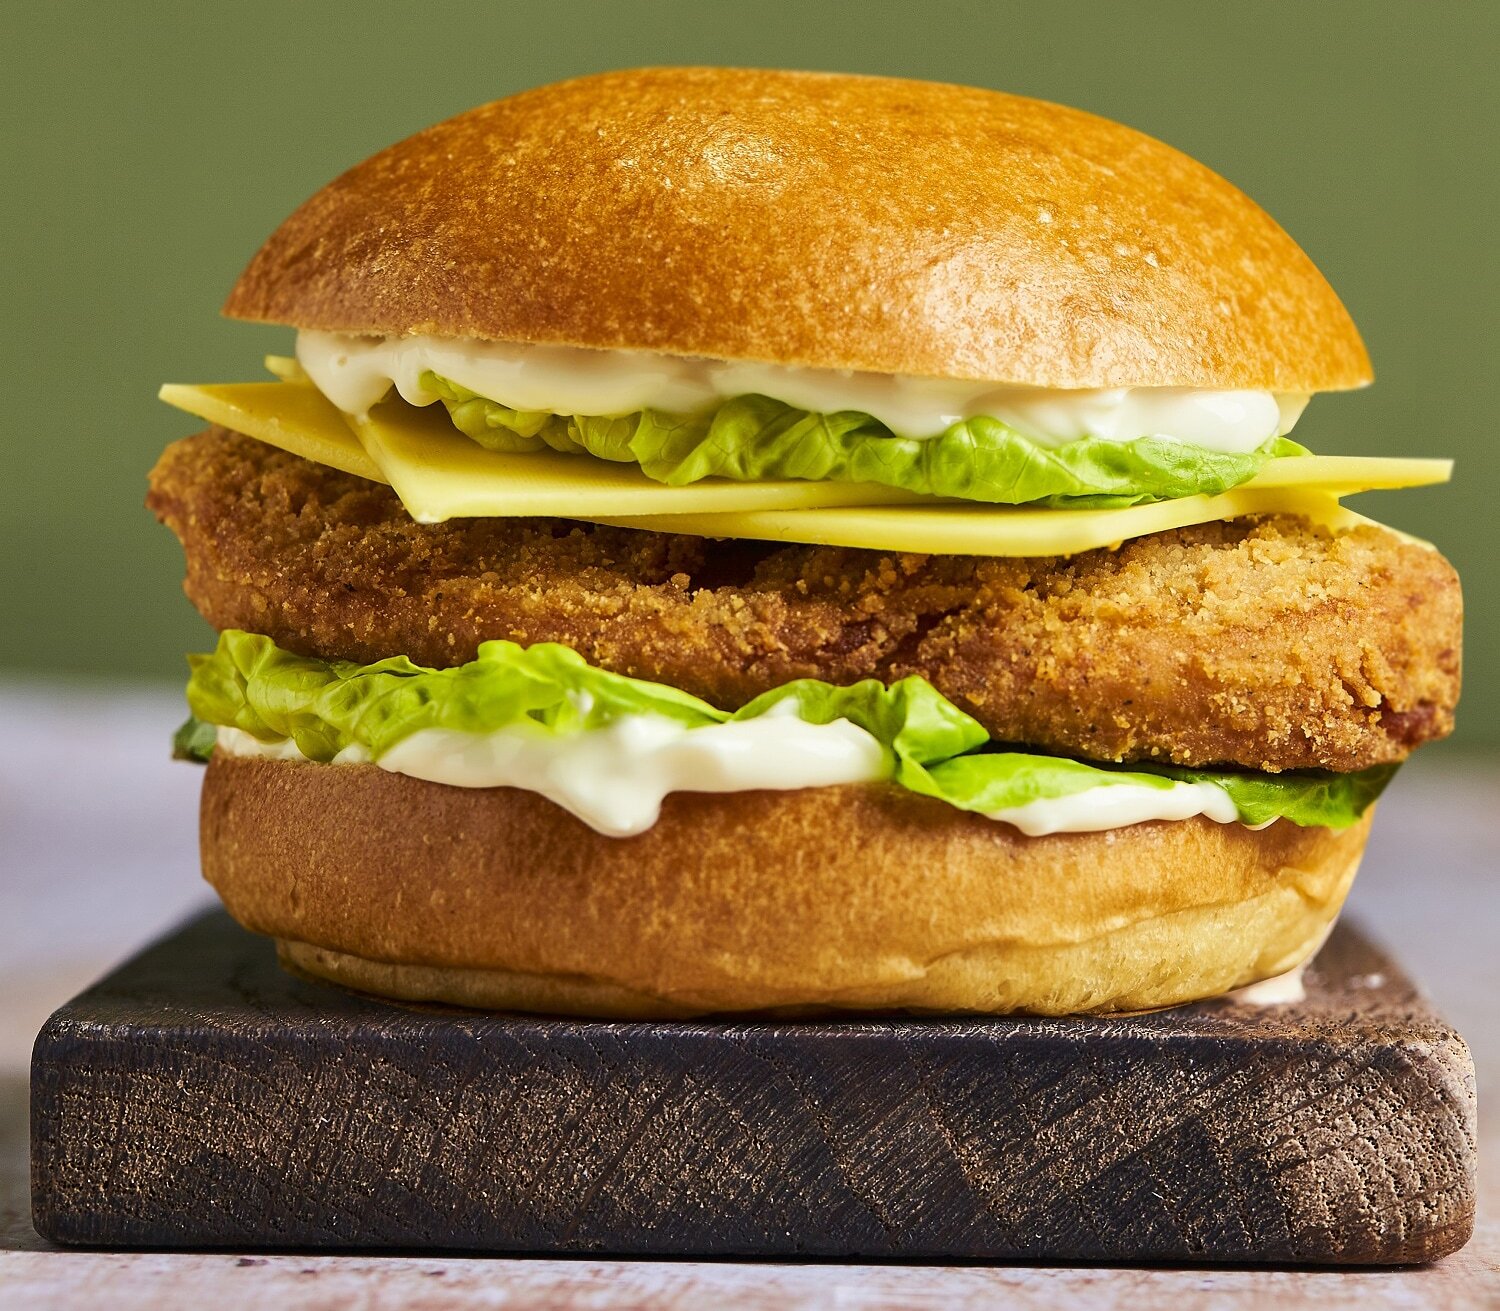 This week's new products: Quorn buttermilk-style chicken burger, Irinox MultiFresh Next, Five Rivers rum and more